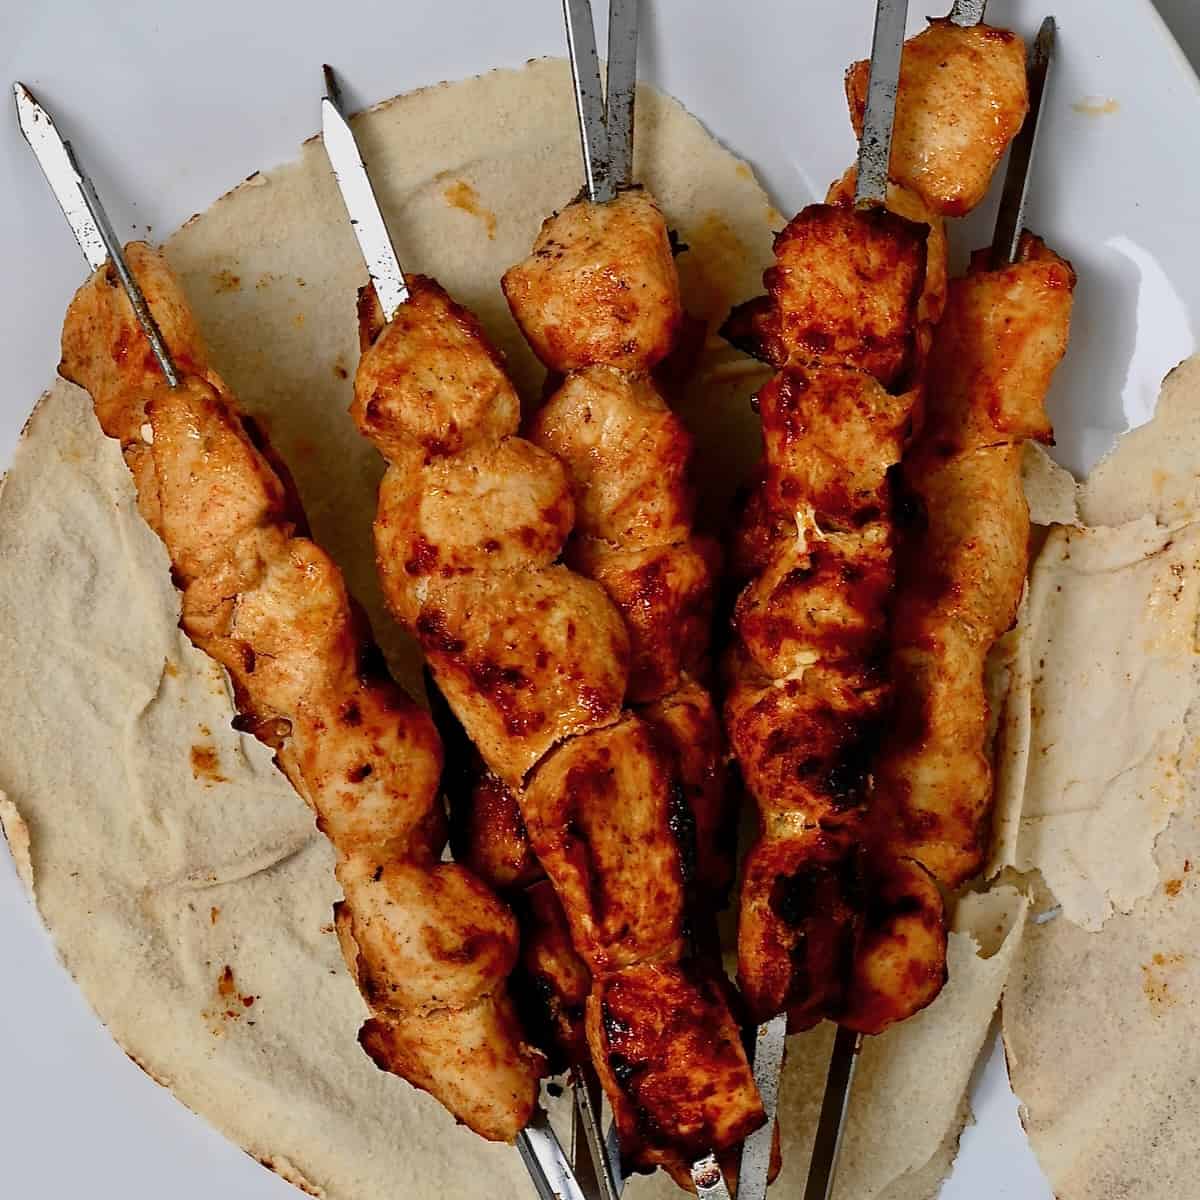 Shish tawook skewers placed over pita bread